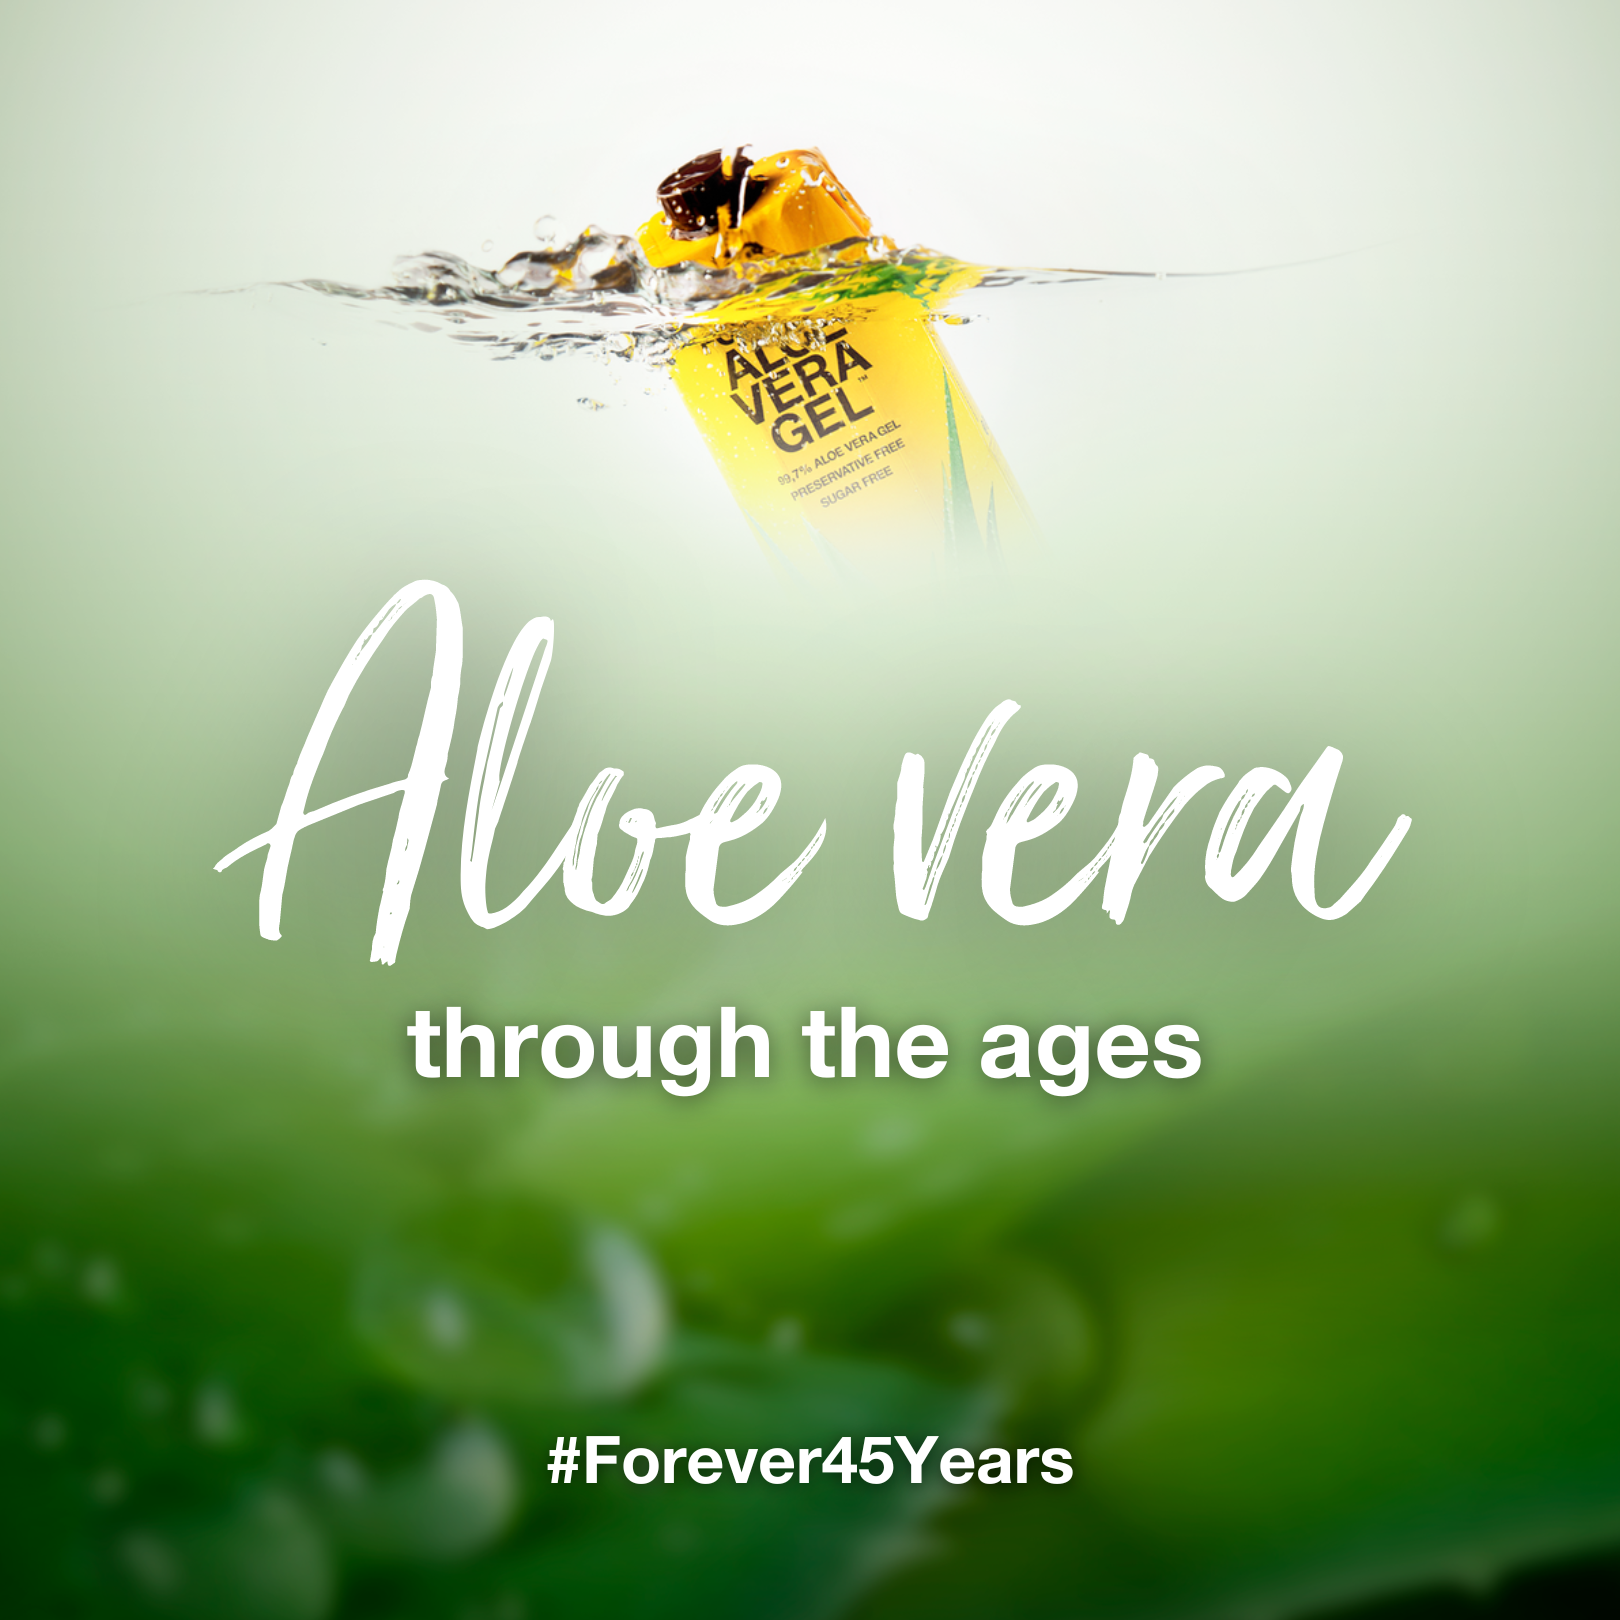 As we approach Forever’s 45th Birthday, it is perhaps a good time to focus on the company’s flagship product: Forever Aloe Vera Gel.

